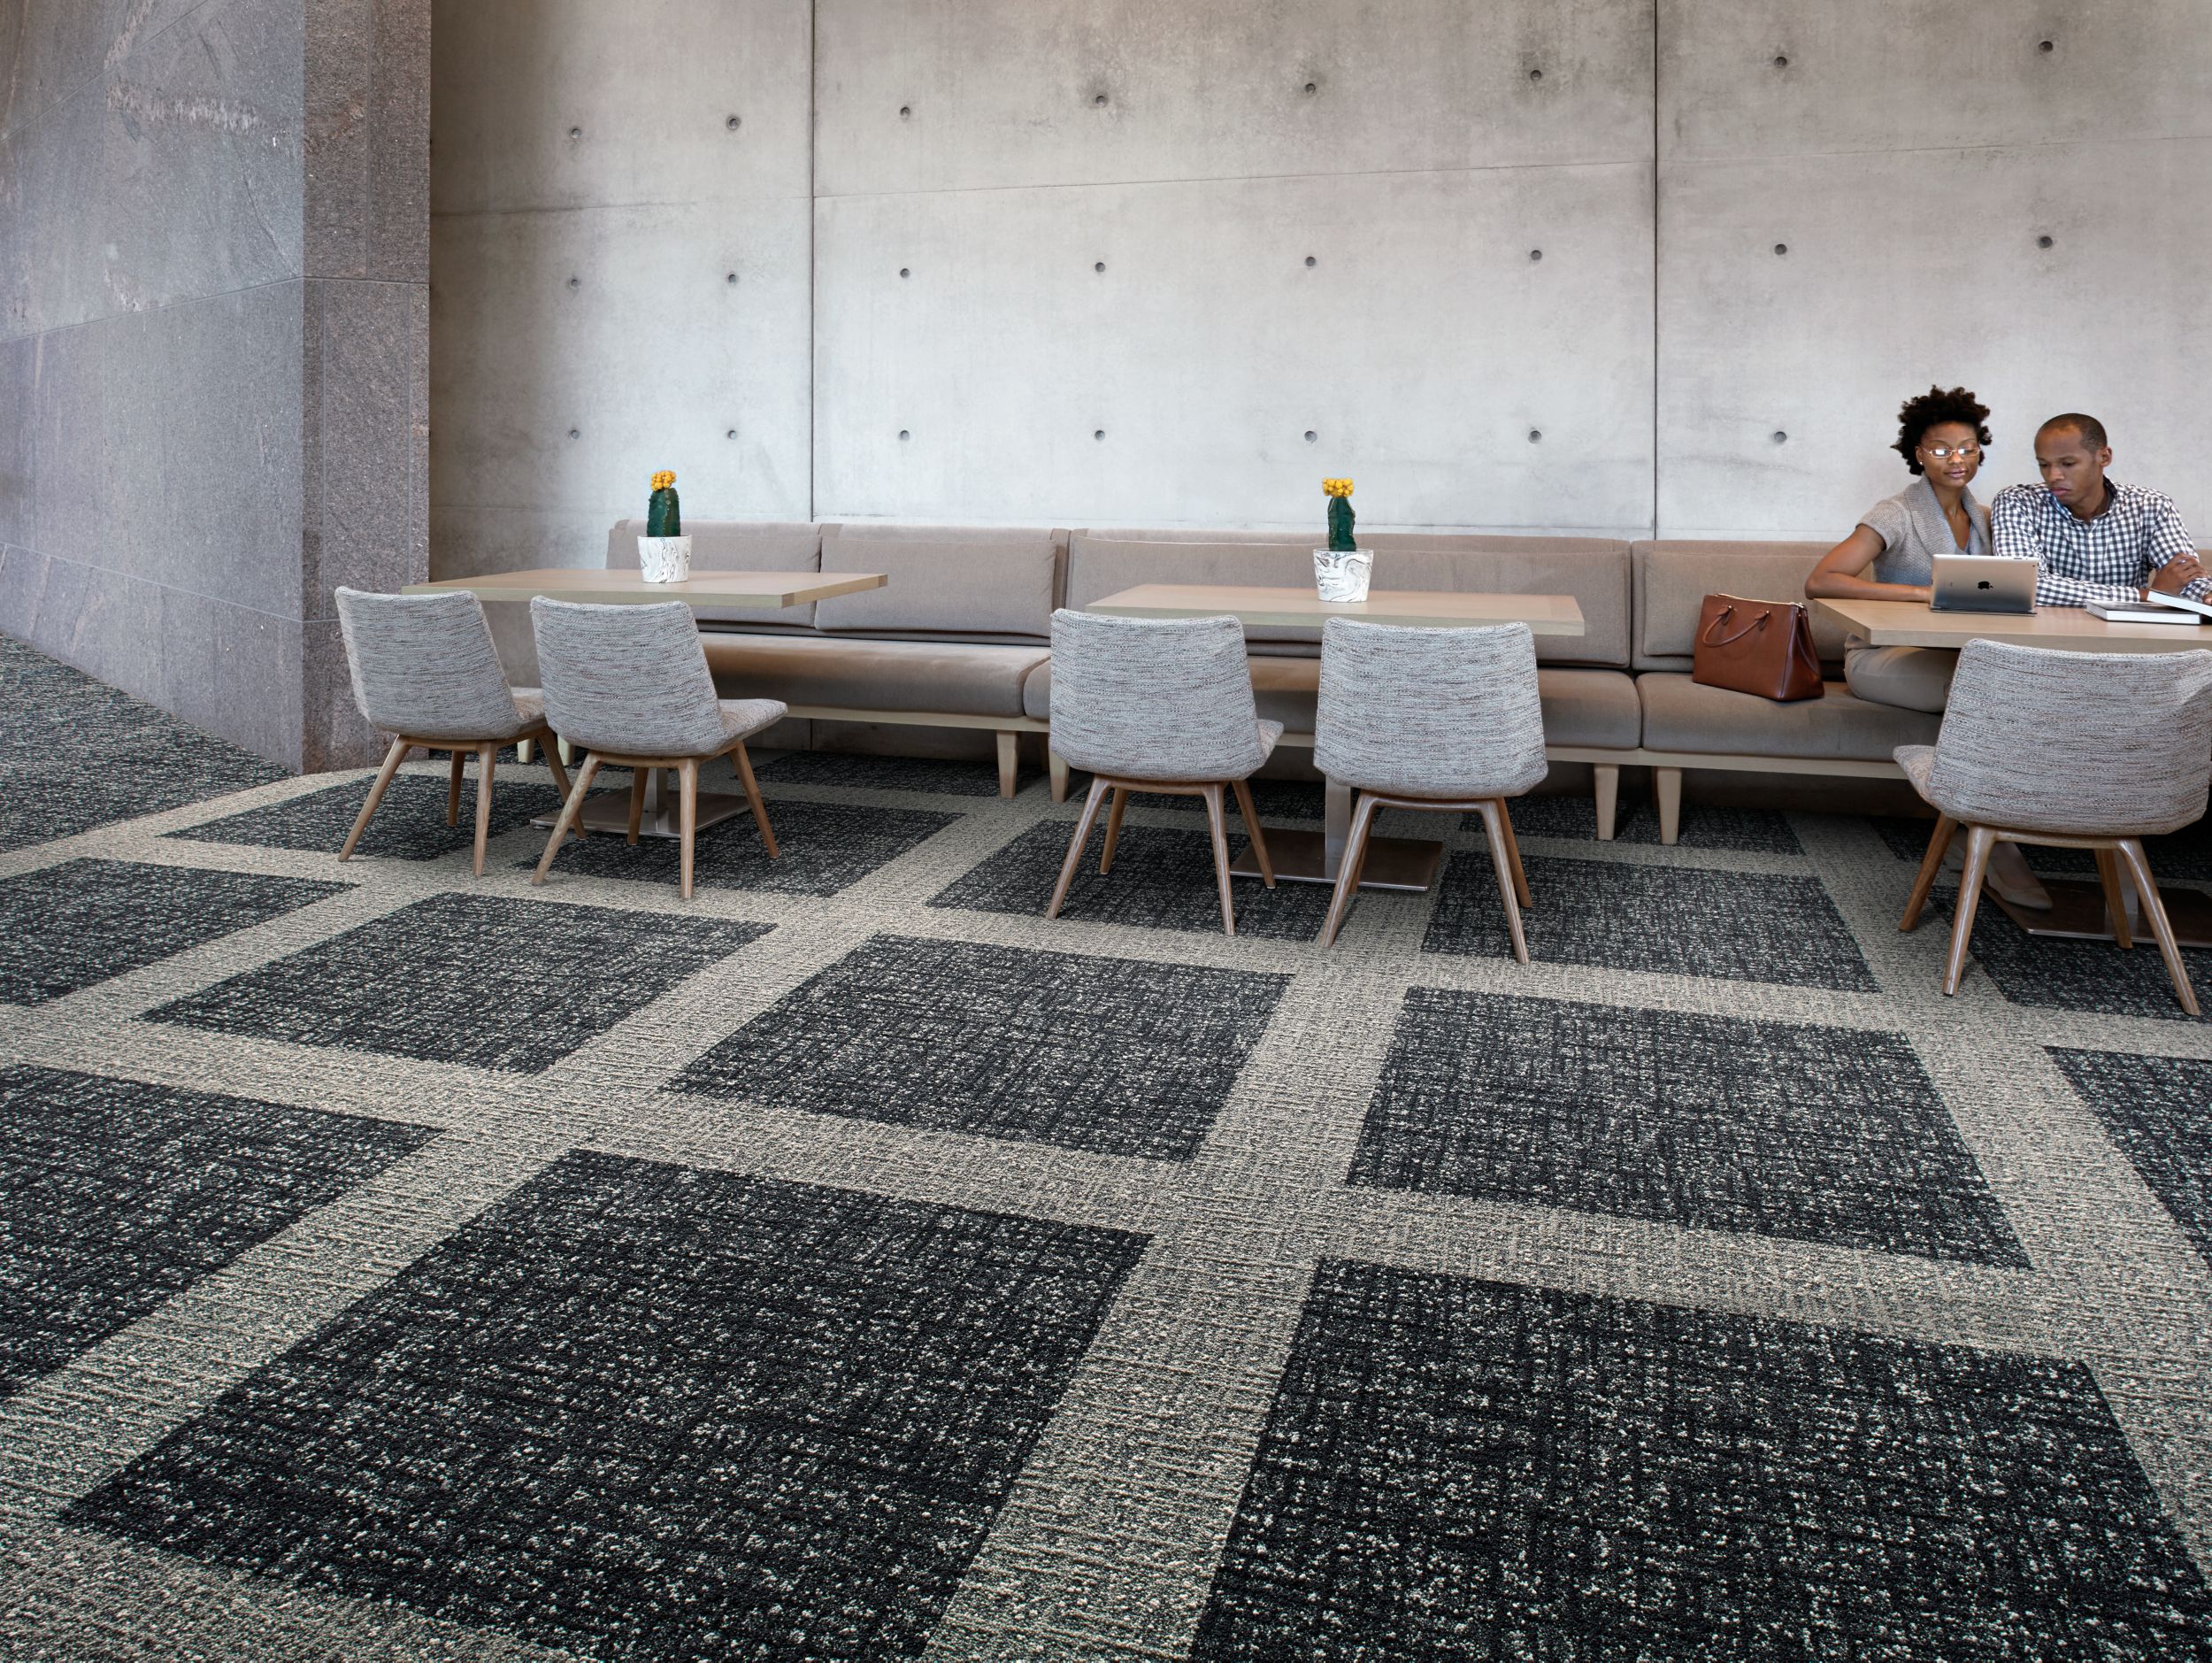 Interface WW895 plank carpet tile and Textured Woodgrains LVT in office common area with tables and chairs Bildnummer 6